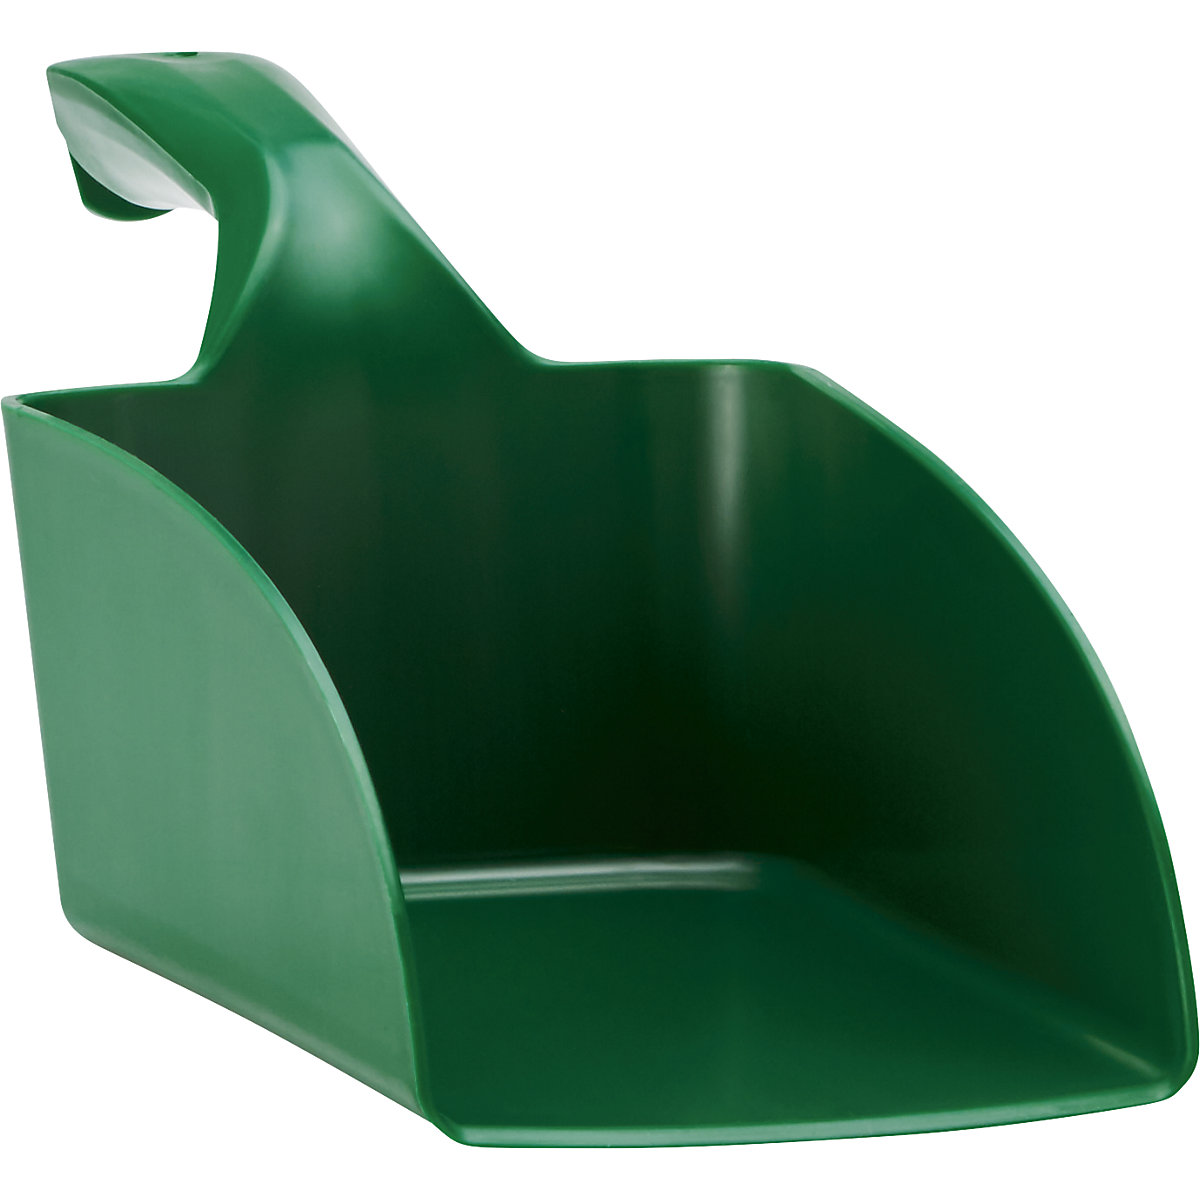 Hand shovel, suitable for foodstuffs – Vikan, capacity 0.5 l, pack of 15, green